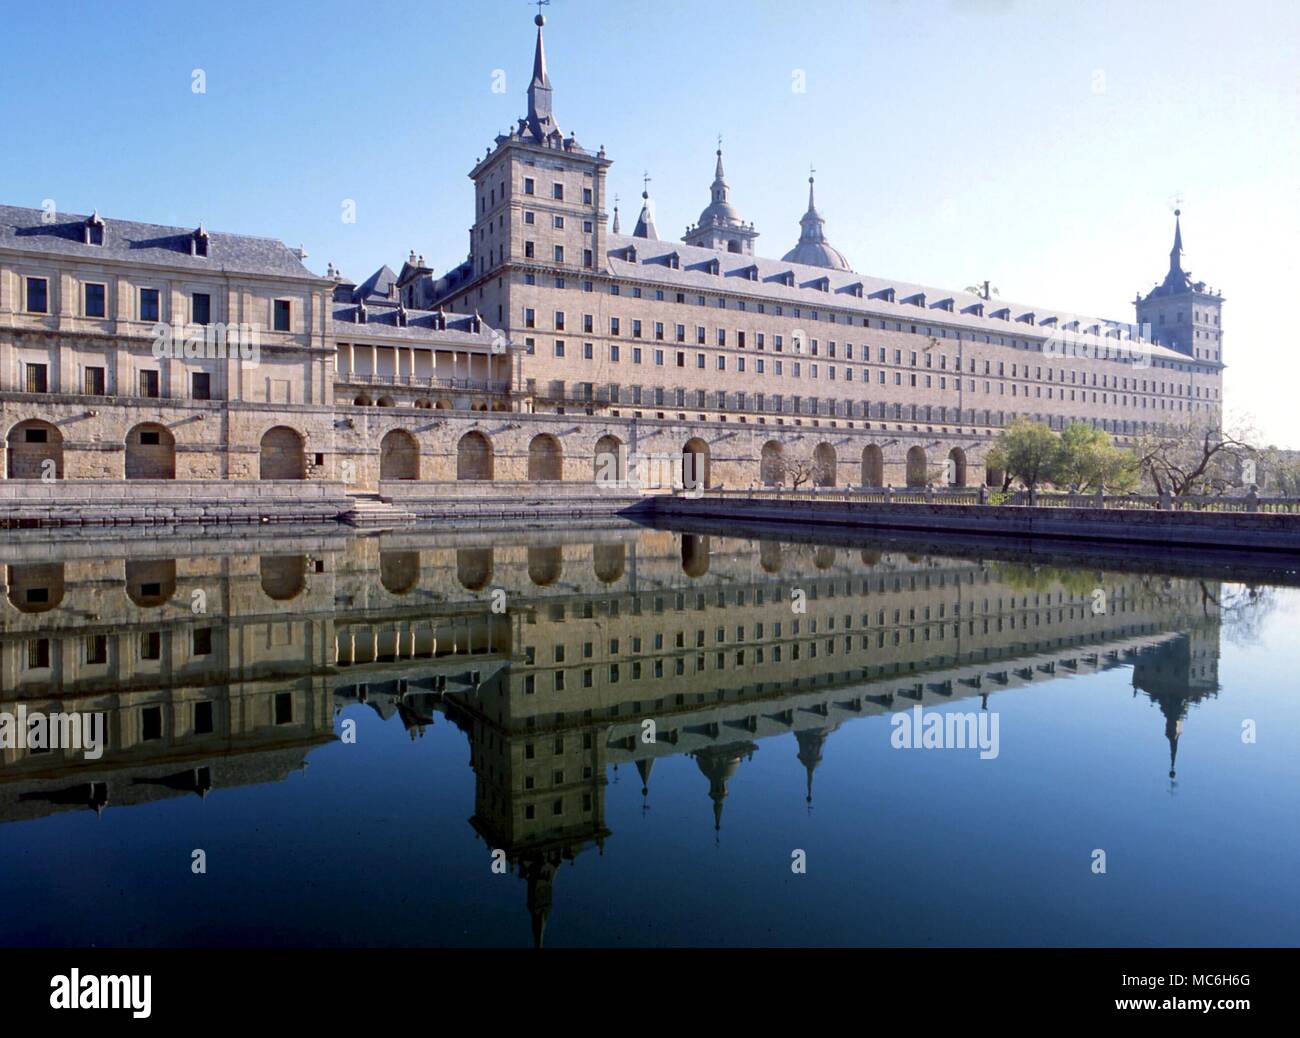 Astrolgocial sites - The Escorial The Escorial (southern side) built by Philip II of Spain on strict astrological principles Stock Photo